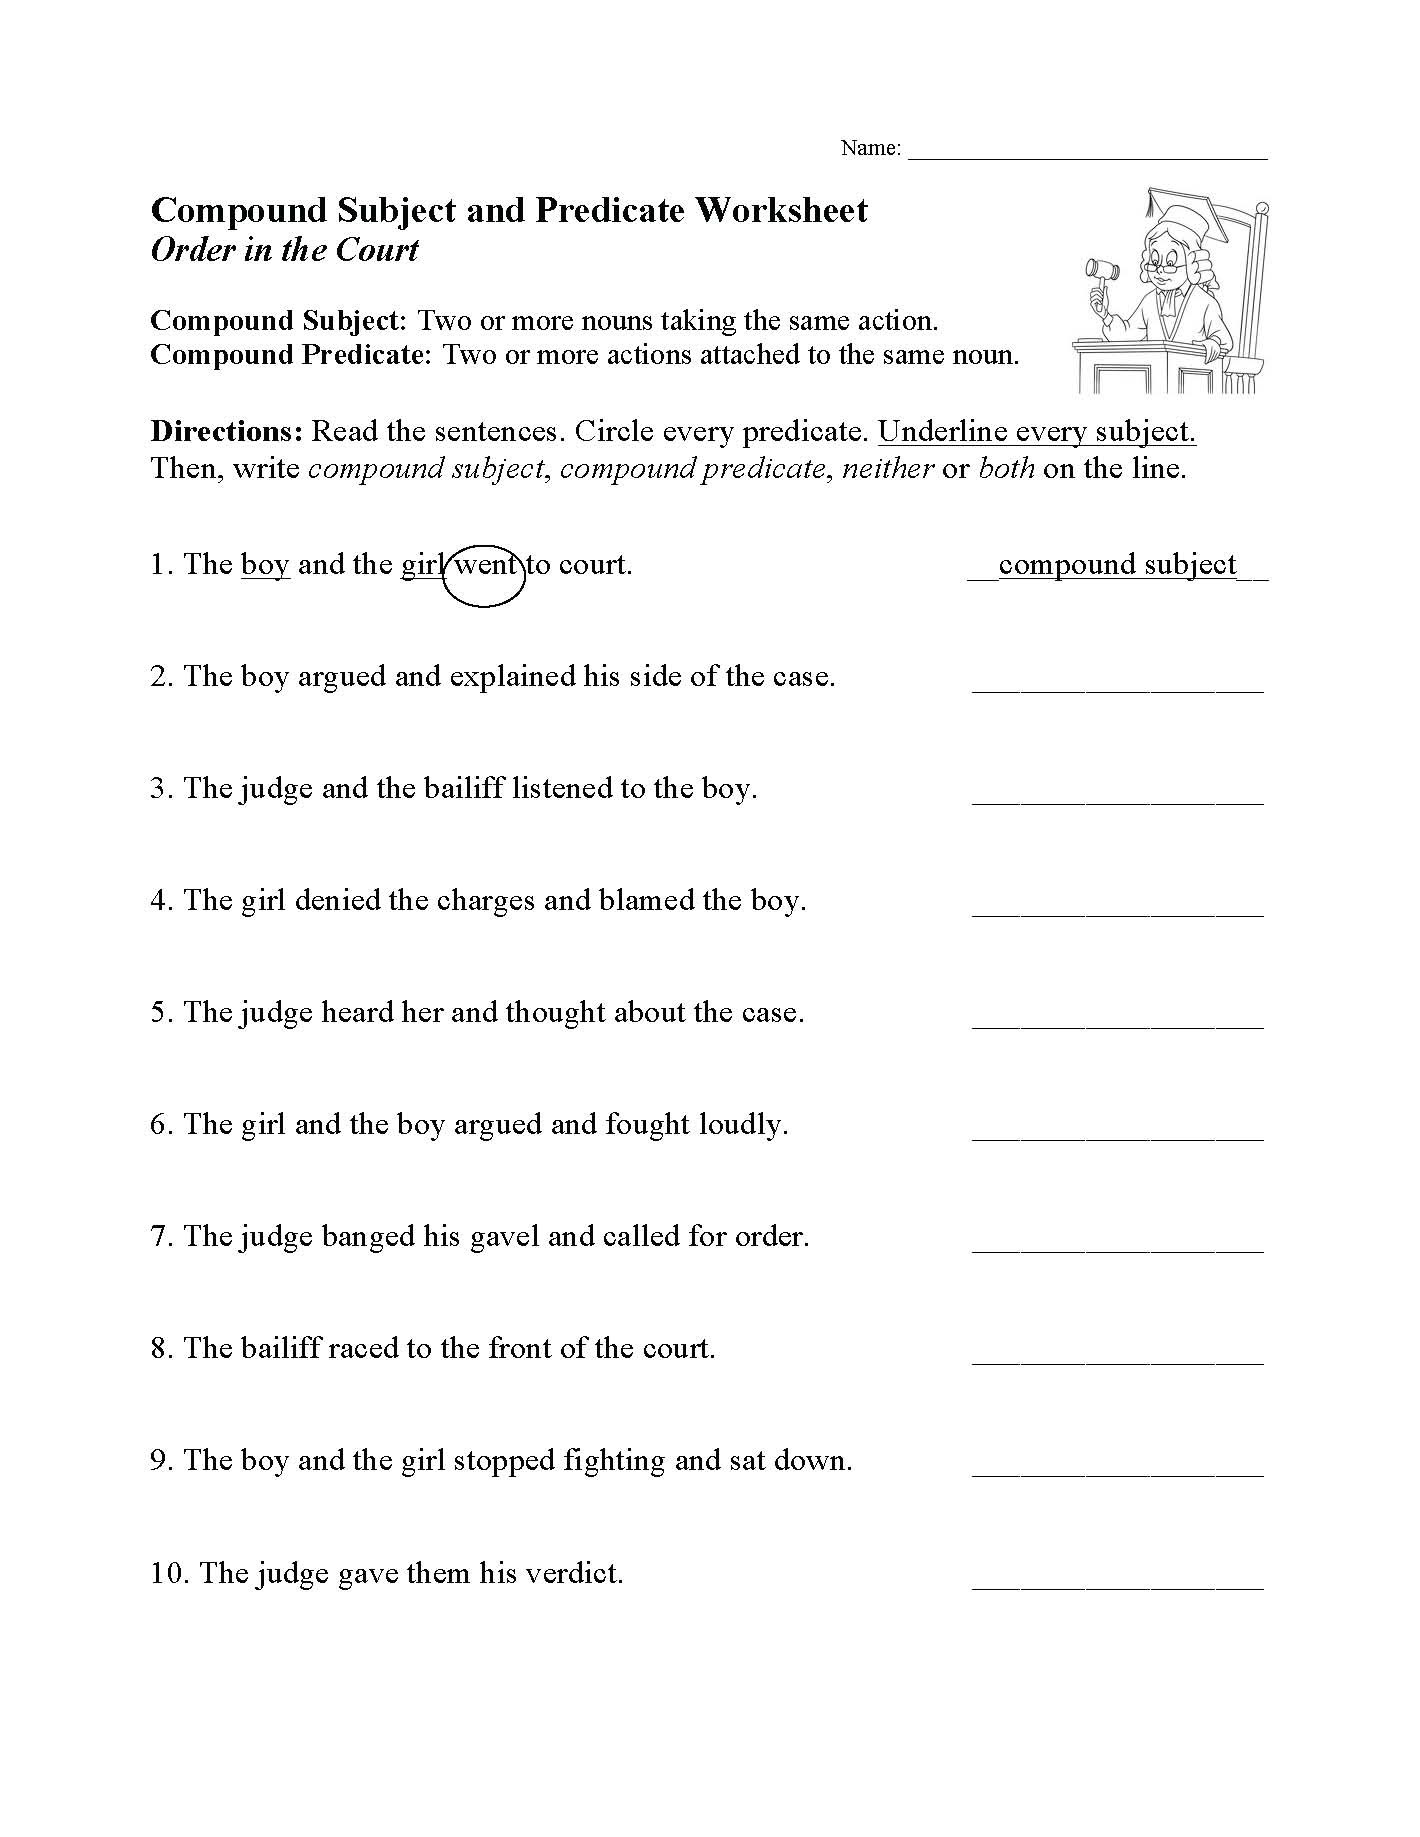 Compound Subject and Predicate Worksheet  Sentence Structure Activity In Subjects And Predicates Worksheet